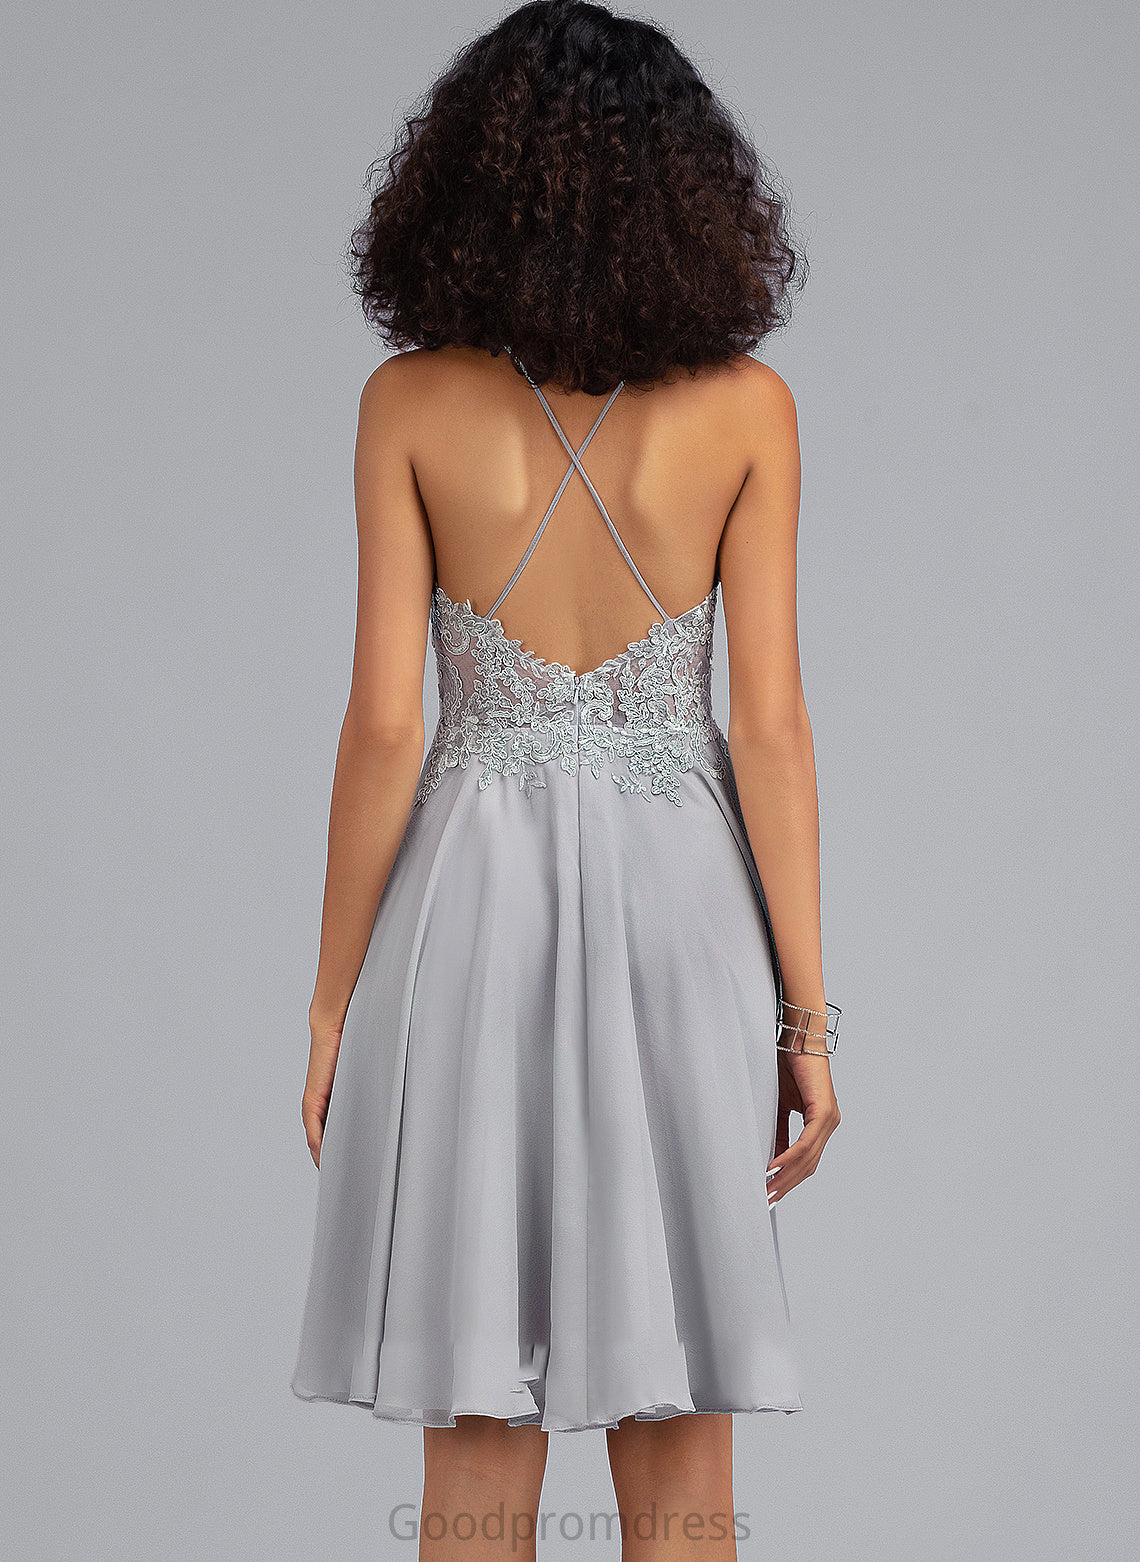 Chiffon Prom Dresses With Knee-Length Maci Neck Scoop Sequins A-Line